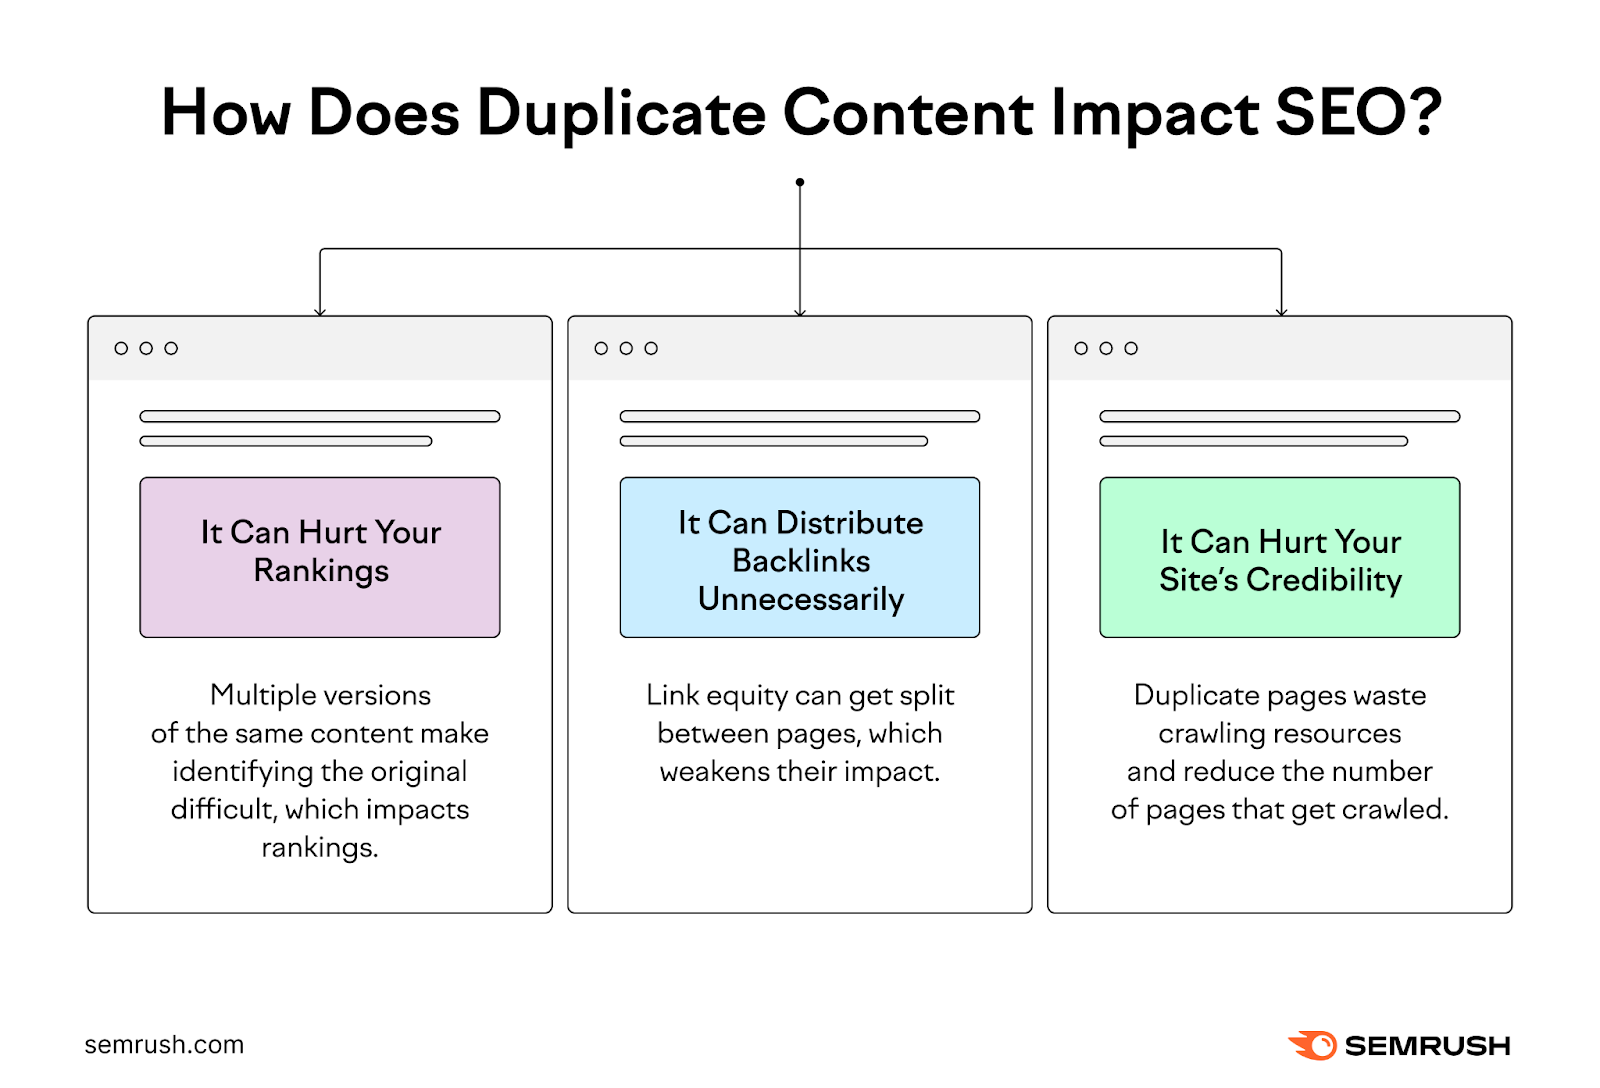 How does duplicate content impact SEO